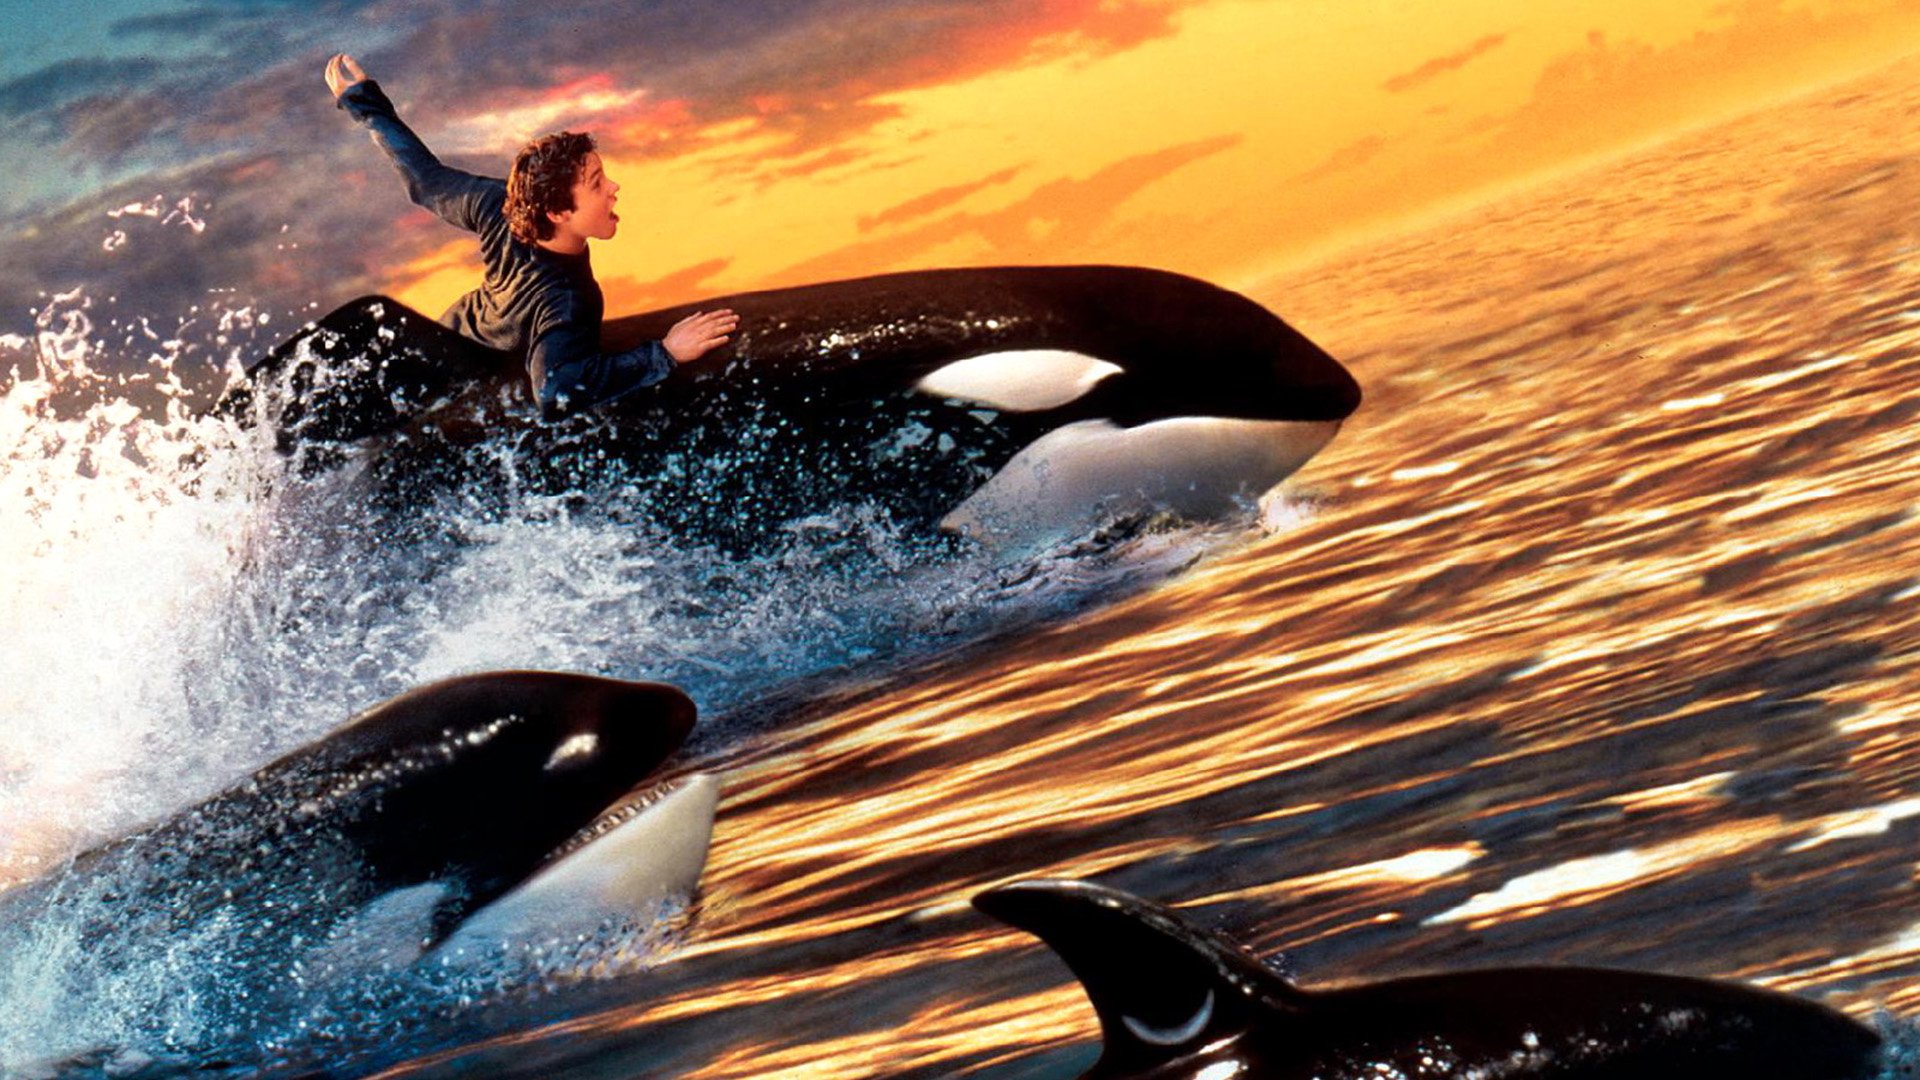 Free Willy 2 The Adventure Home HD Wallpapers and Backgrounds